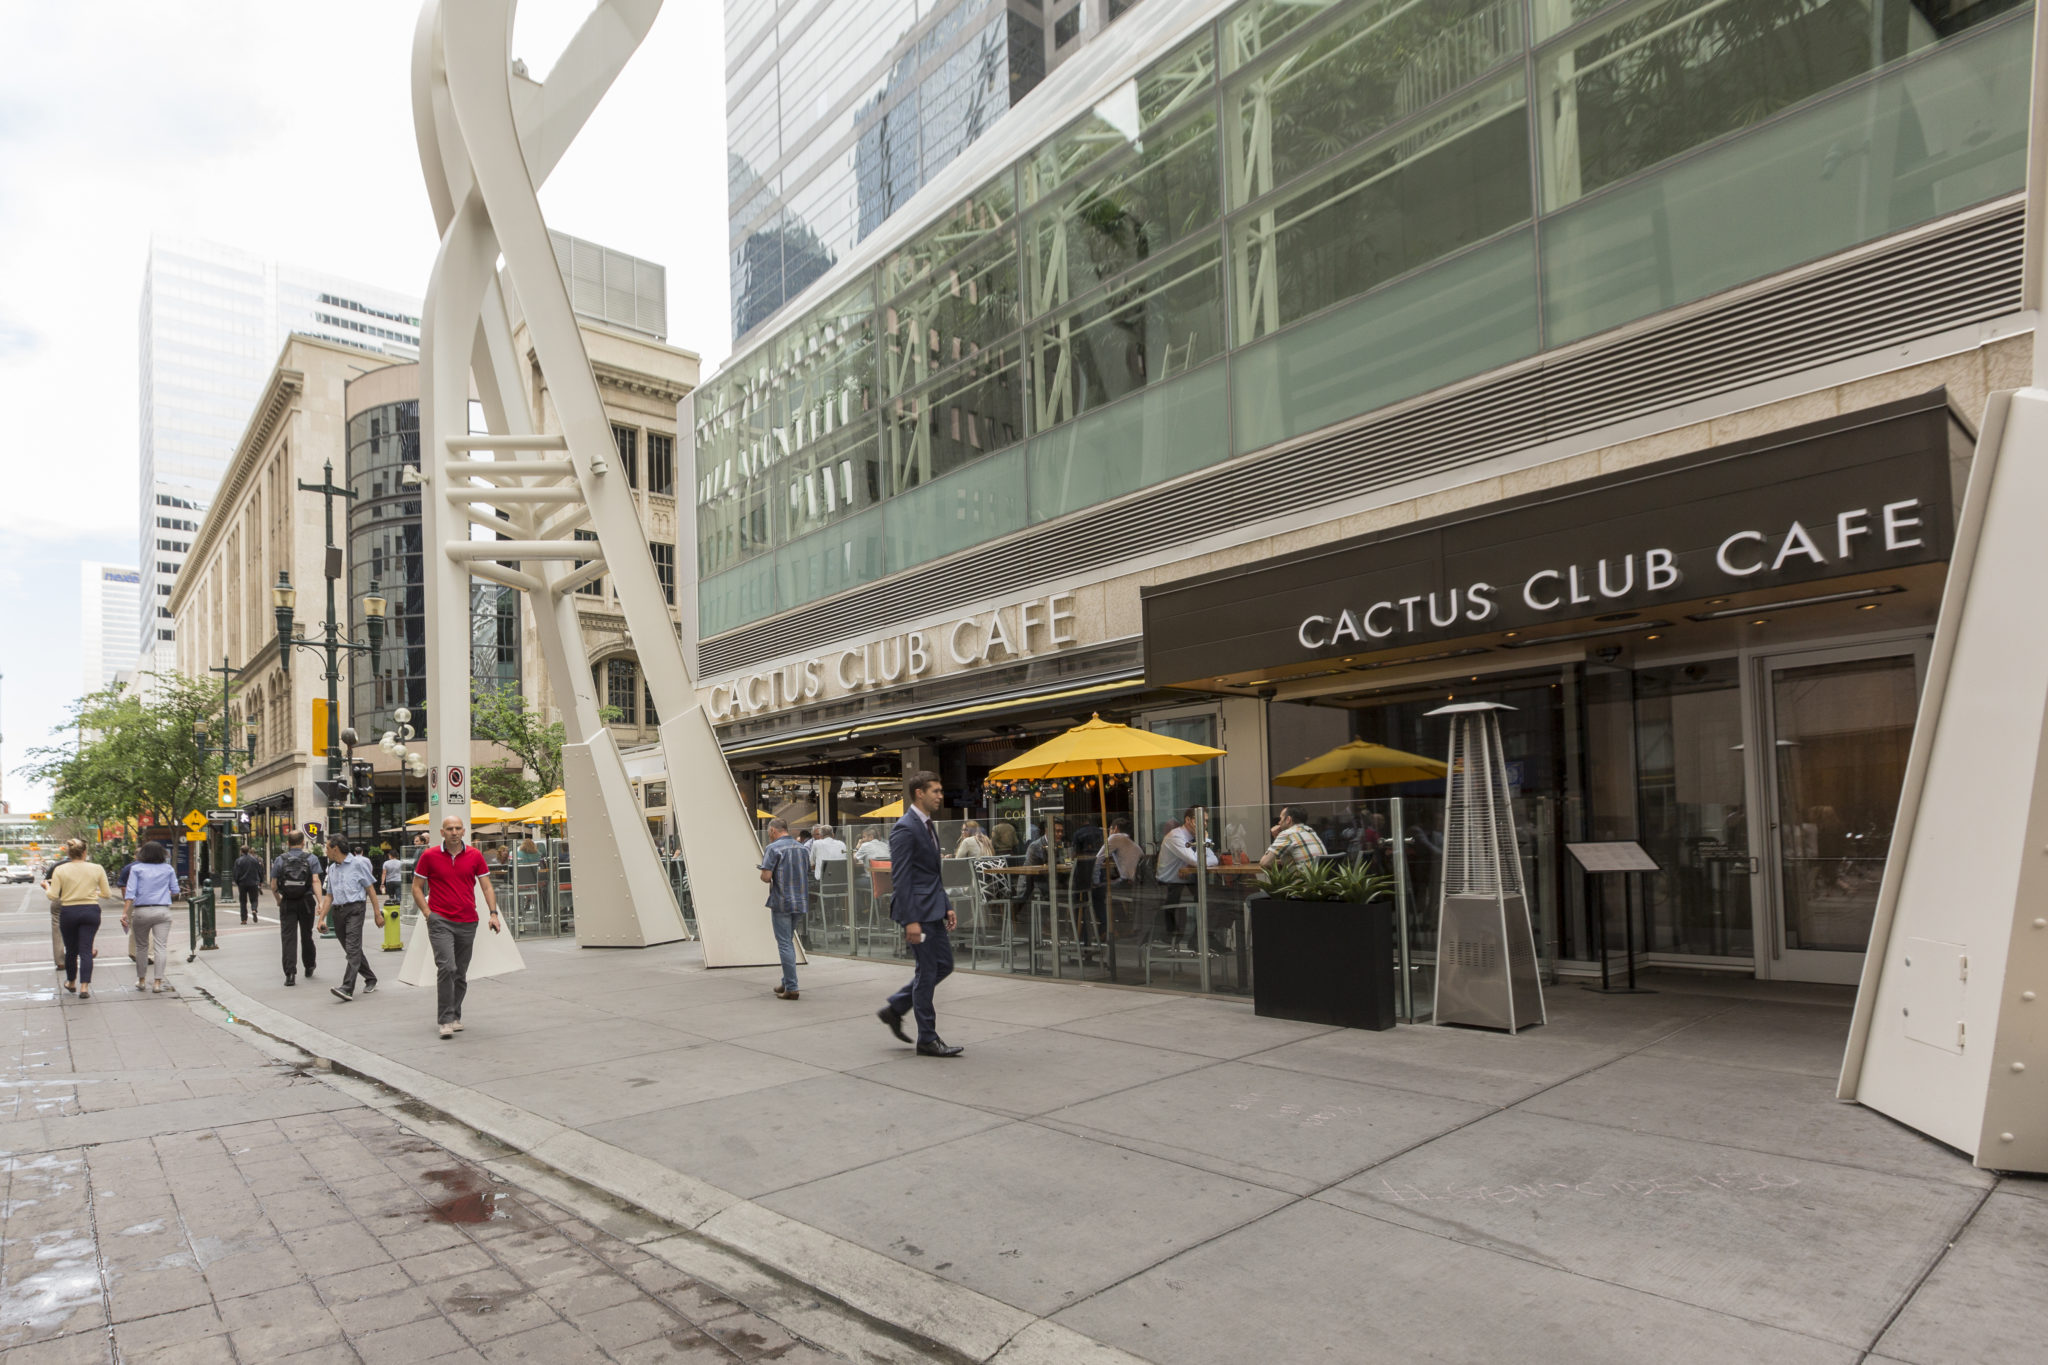 Calgary is getting a brand new Cactus Club location soon